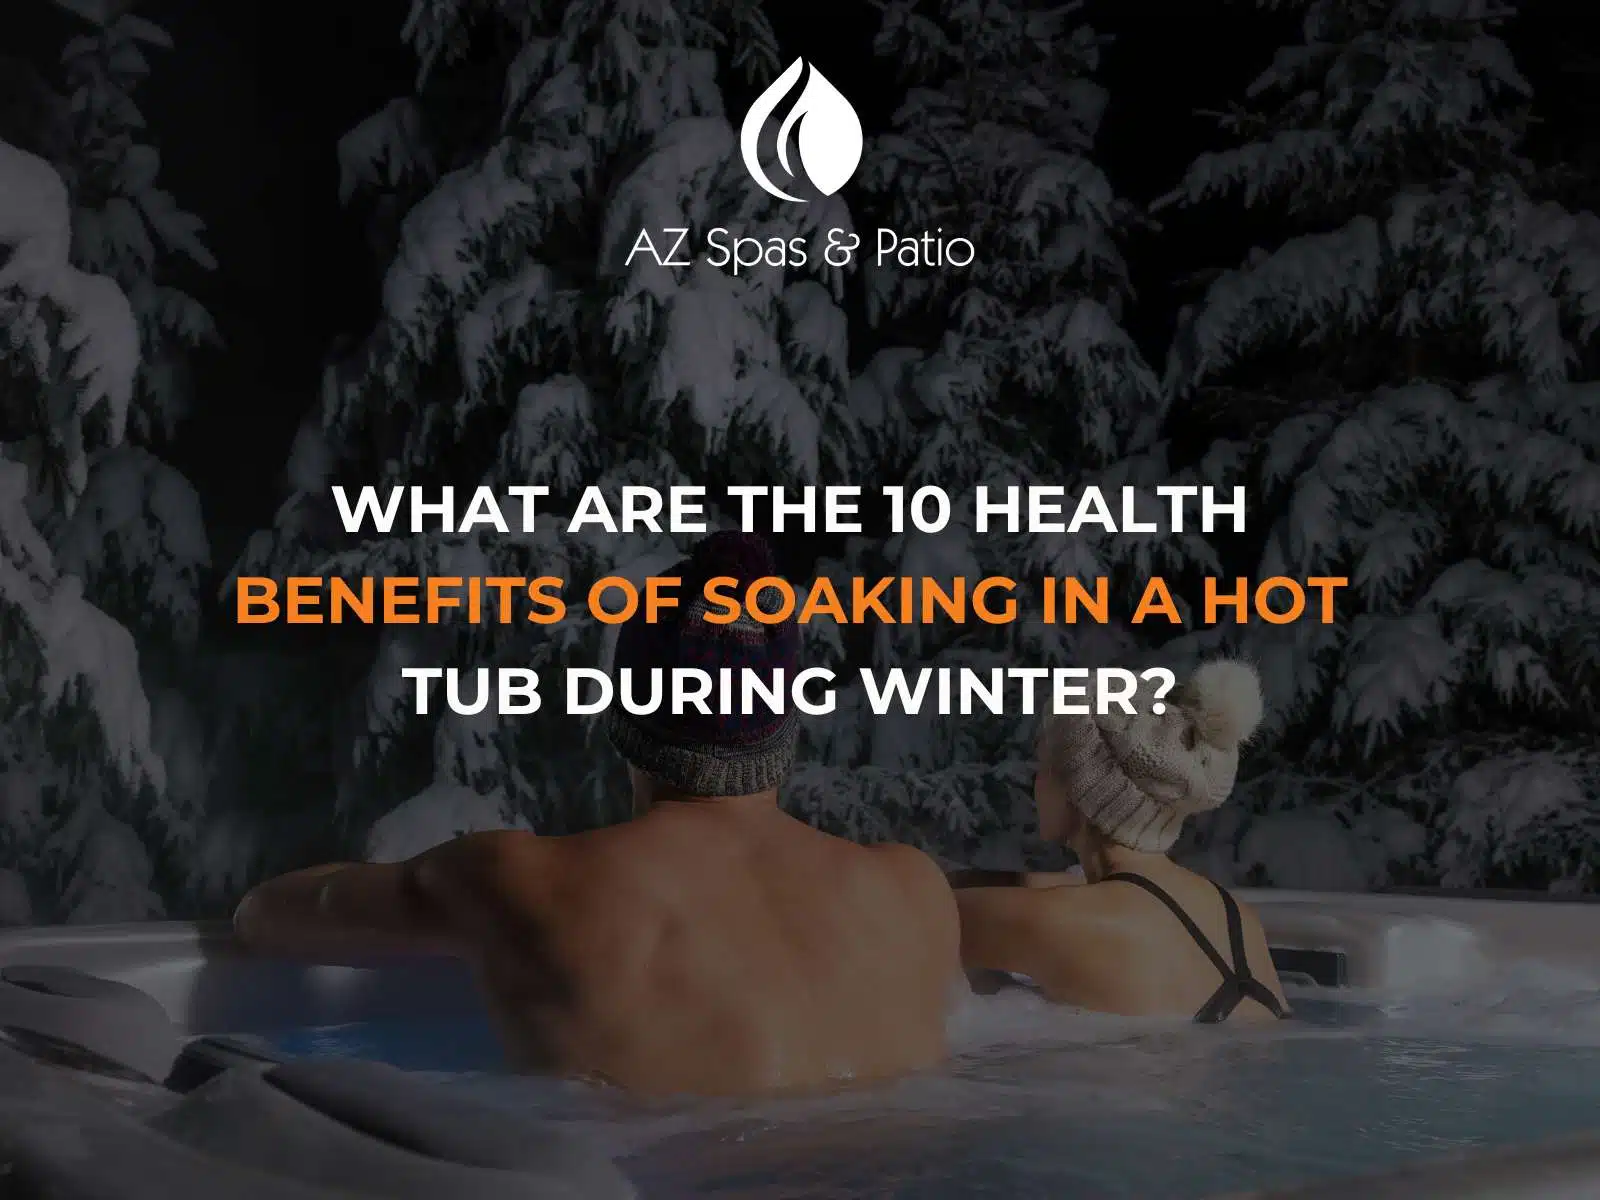 What Are The 10 Health Benefits Of Soaking In a Hot Tub During Winter